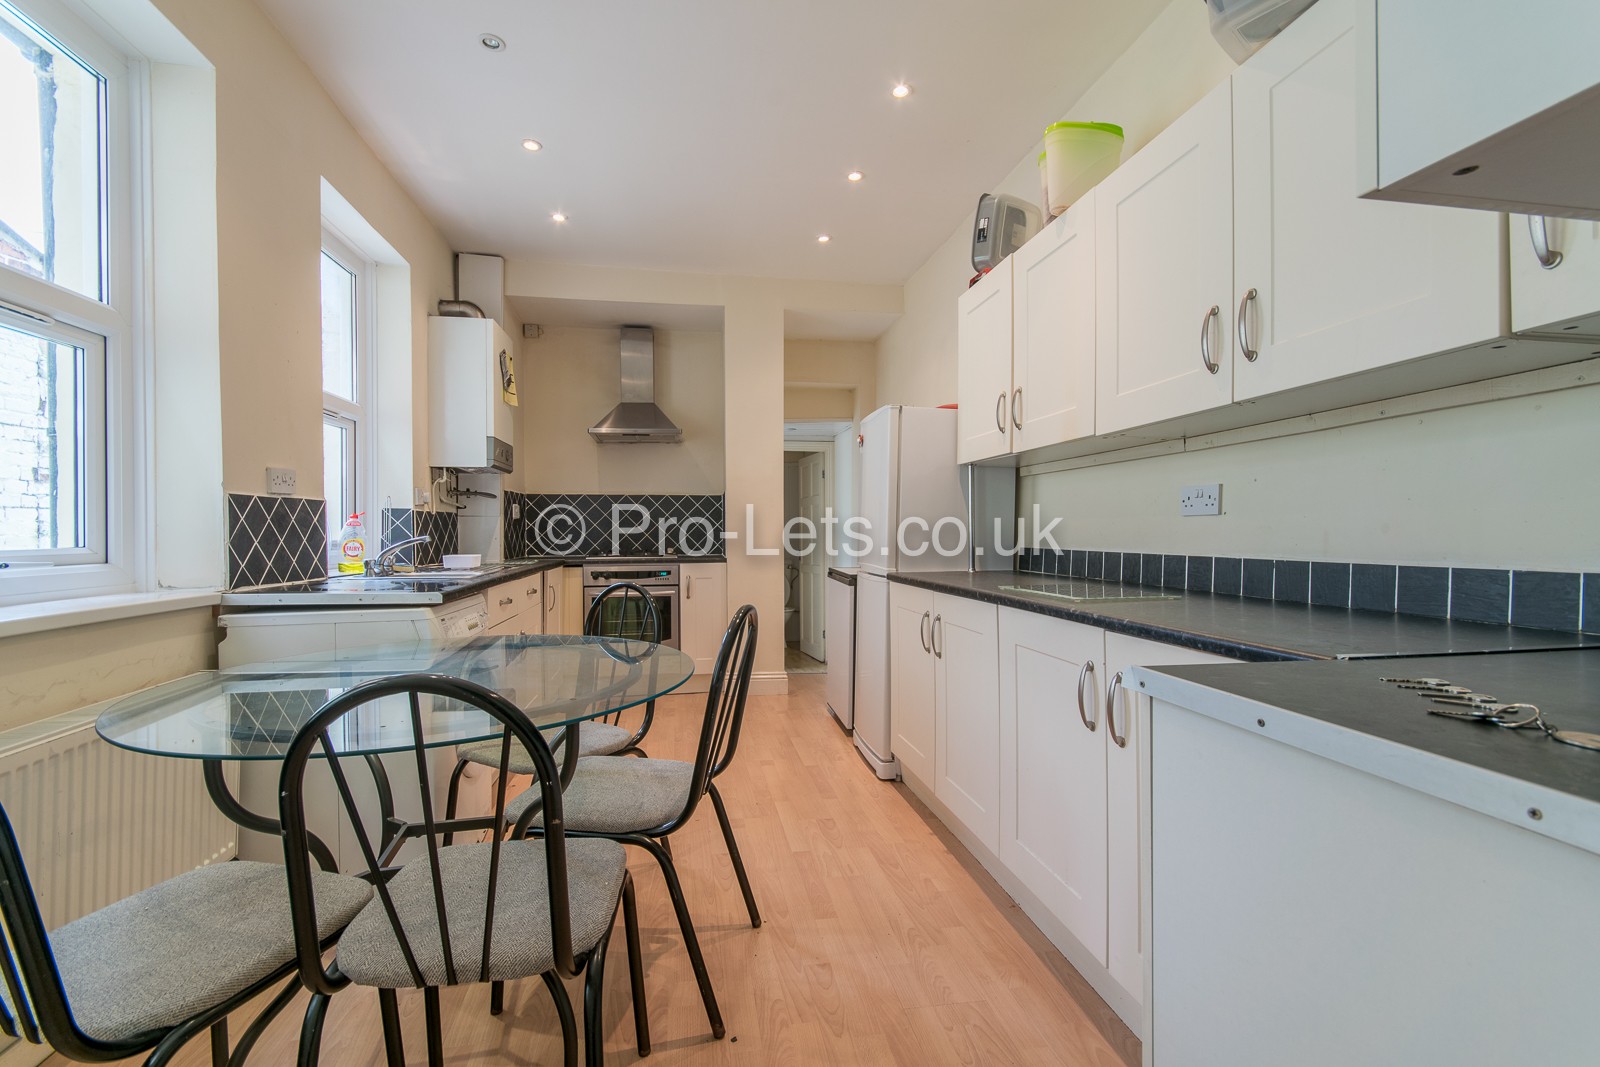 5 bed Mid Terraced House for rent in Newcastle Upon Tyne. From pro-lets.co.uk